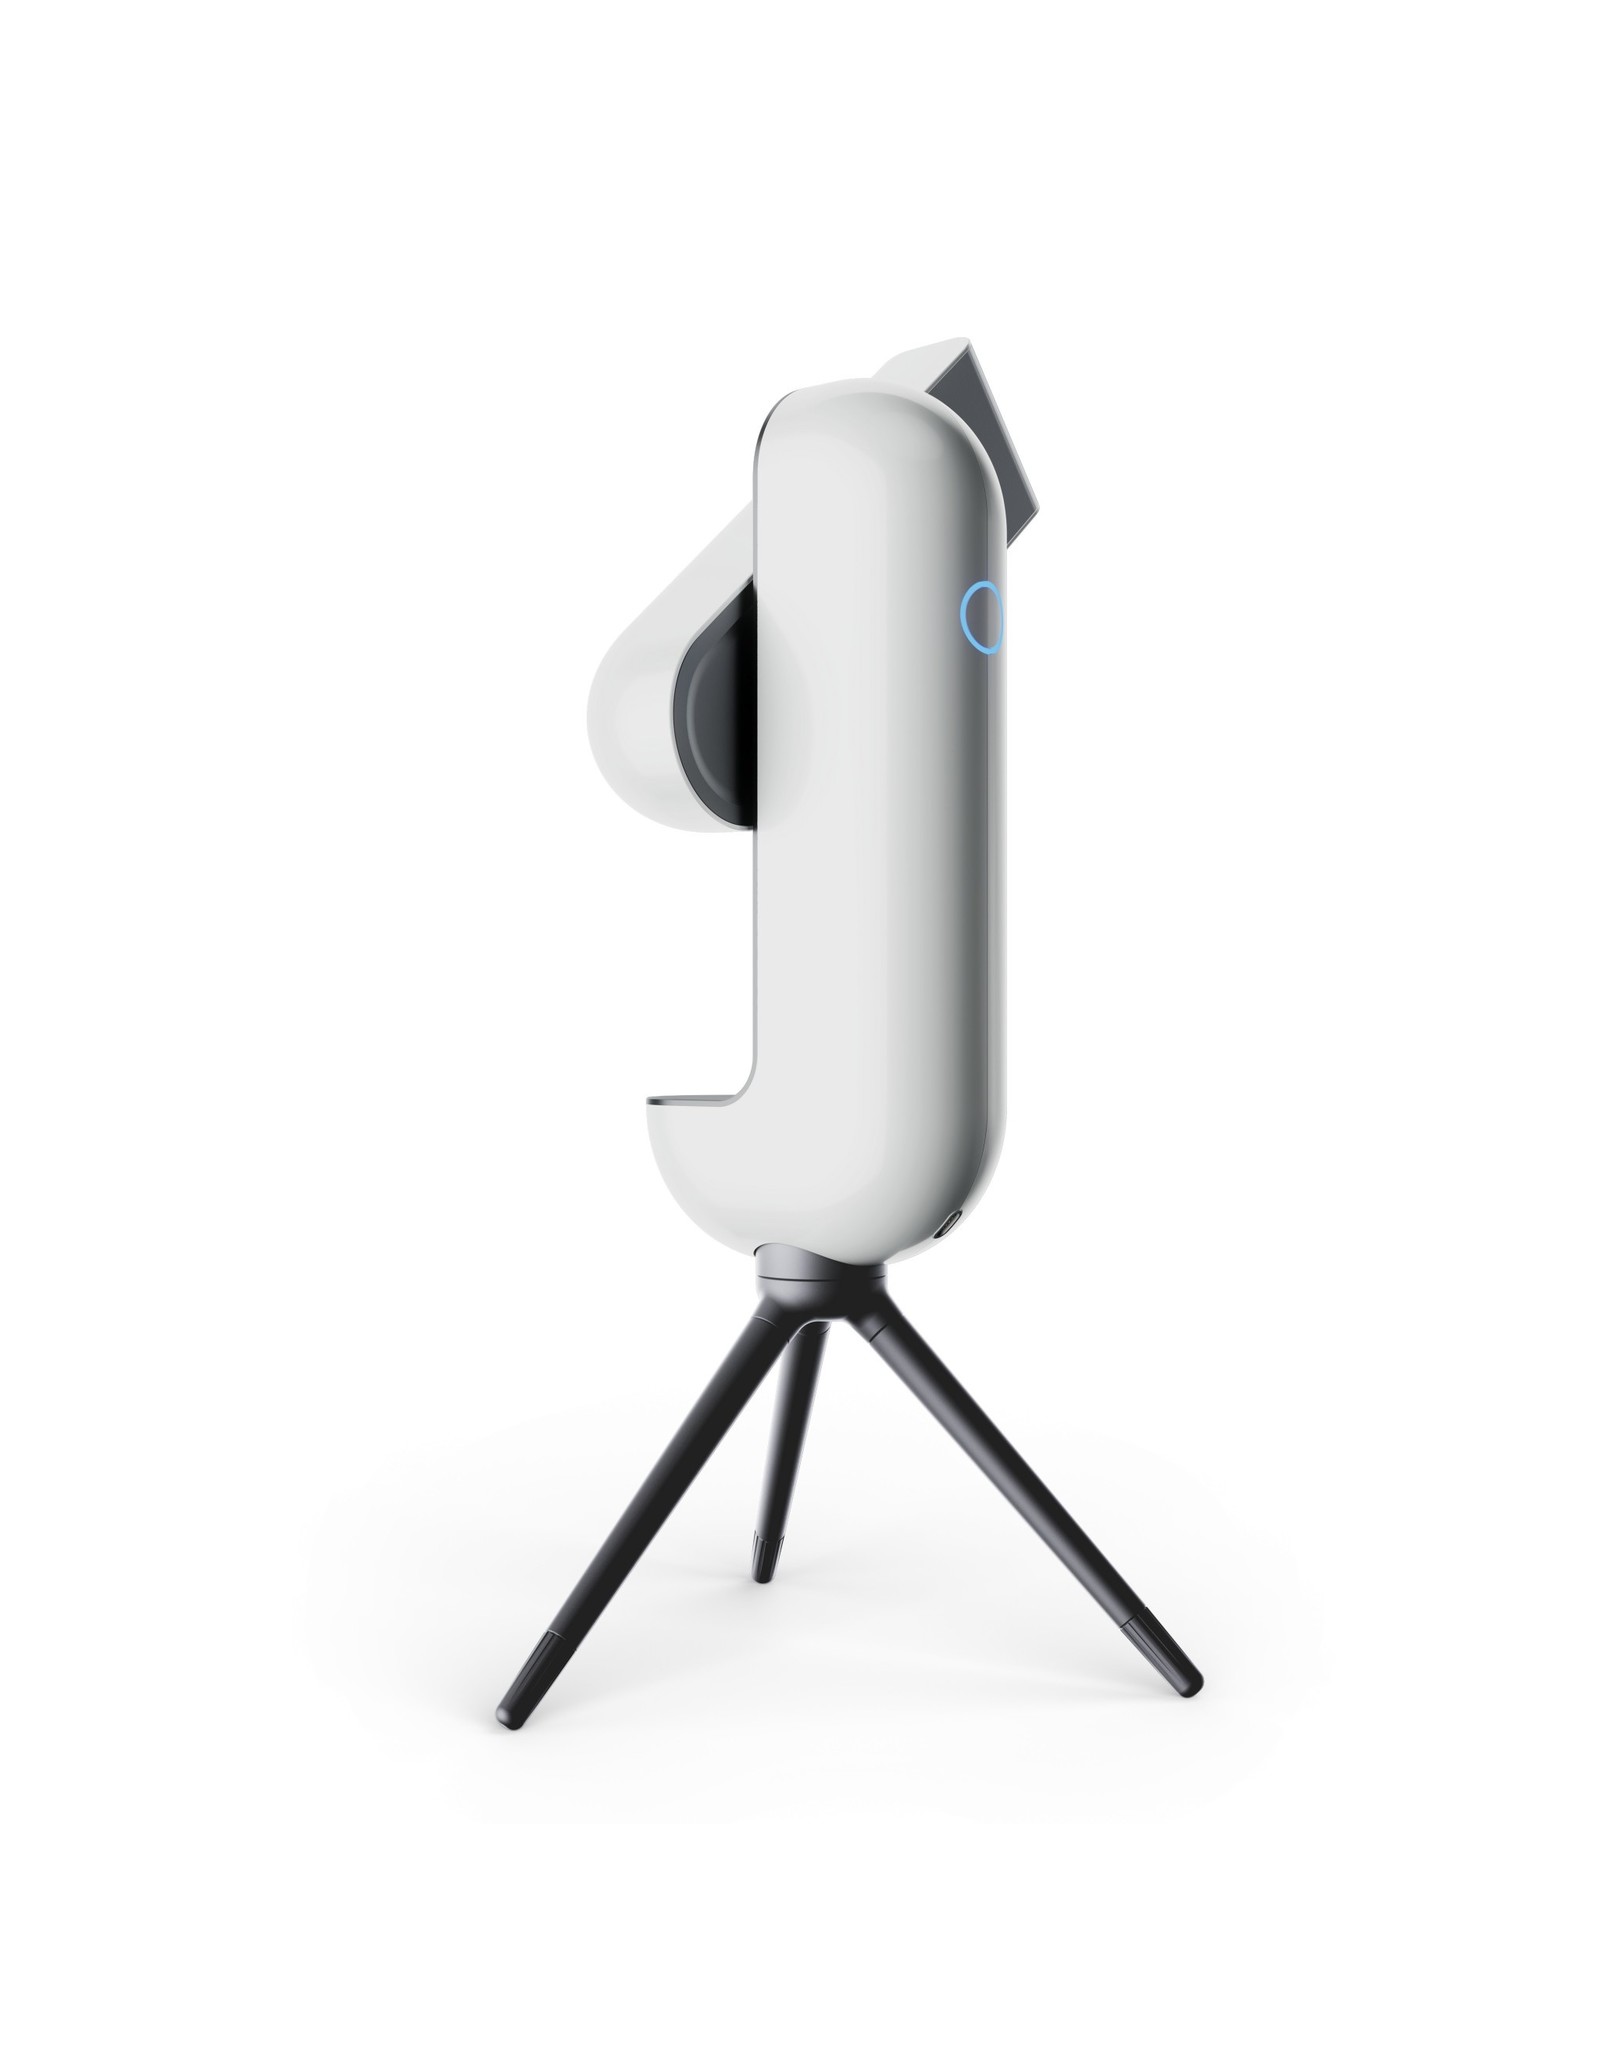 Vaonis Vaonis Vespera Portable Observation station  --  SPECIAL SALE - QUANTITIES LIMITED AT THIS PRICE!!